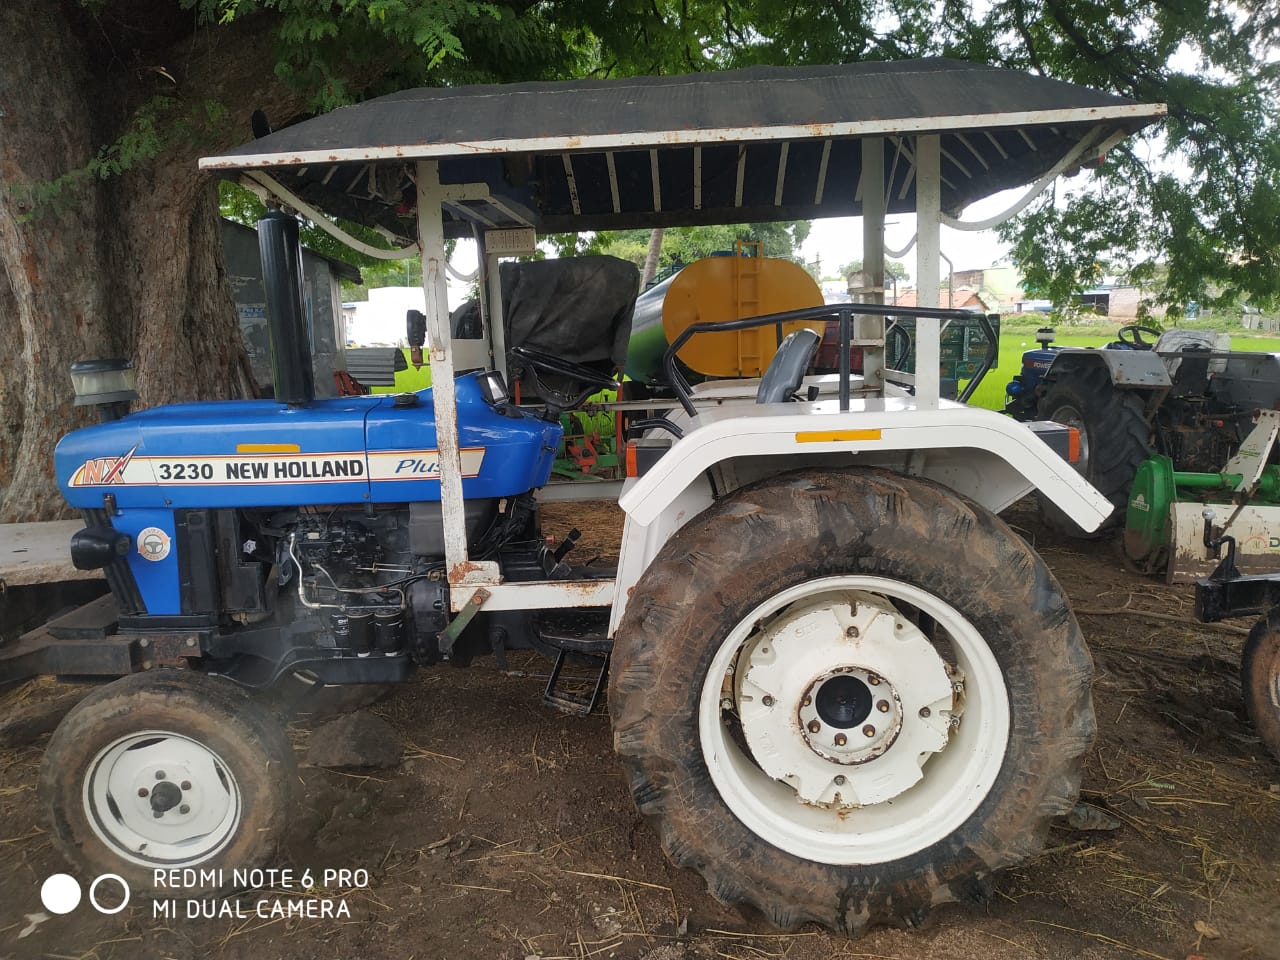 NEW HOLLAND 3230 TRACTOR SALES IN TAMIL NADU